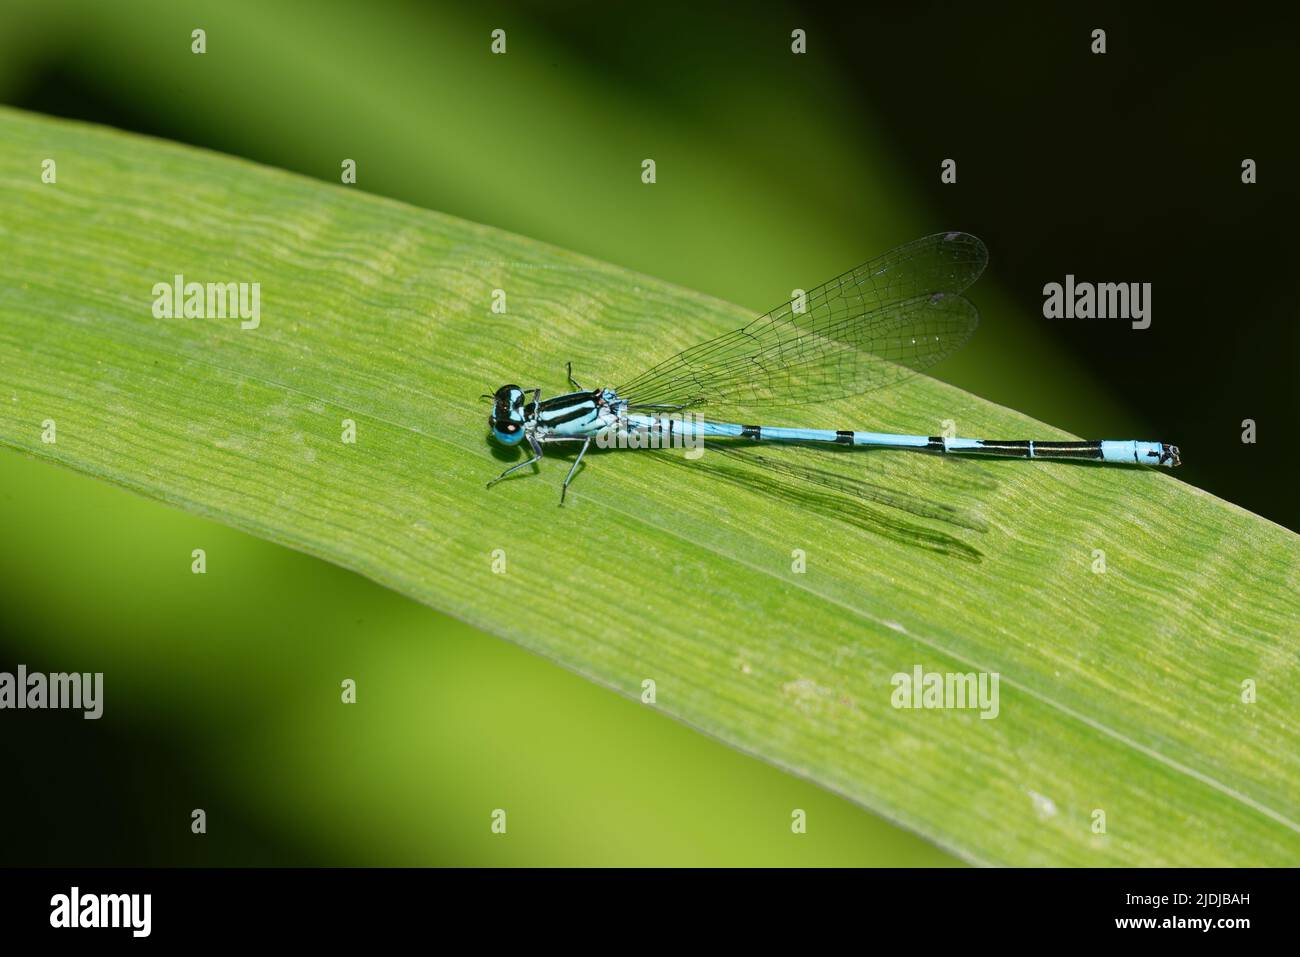 Azure damselfly (Coenagrion puella) is a species of damselfly found in most of Europe. It is notable for its distinctive black and blue colouring. Stock Photo